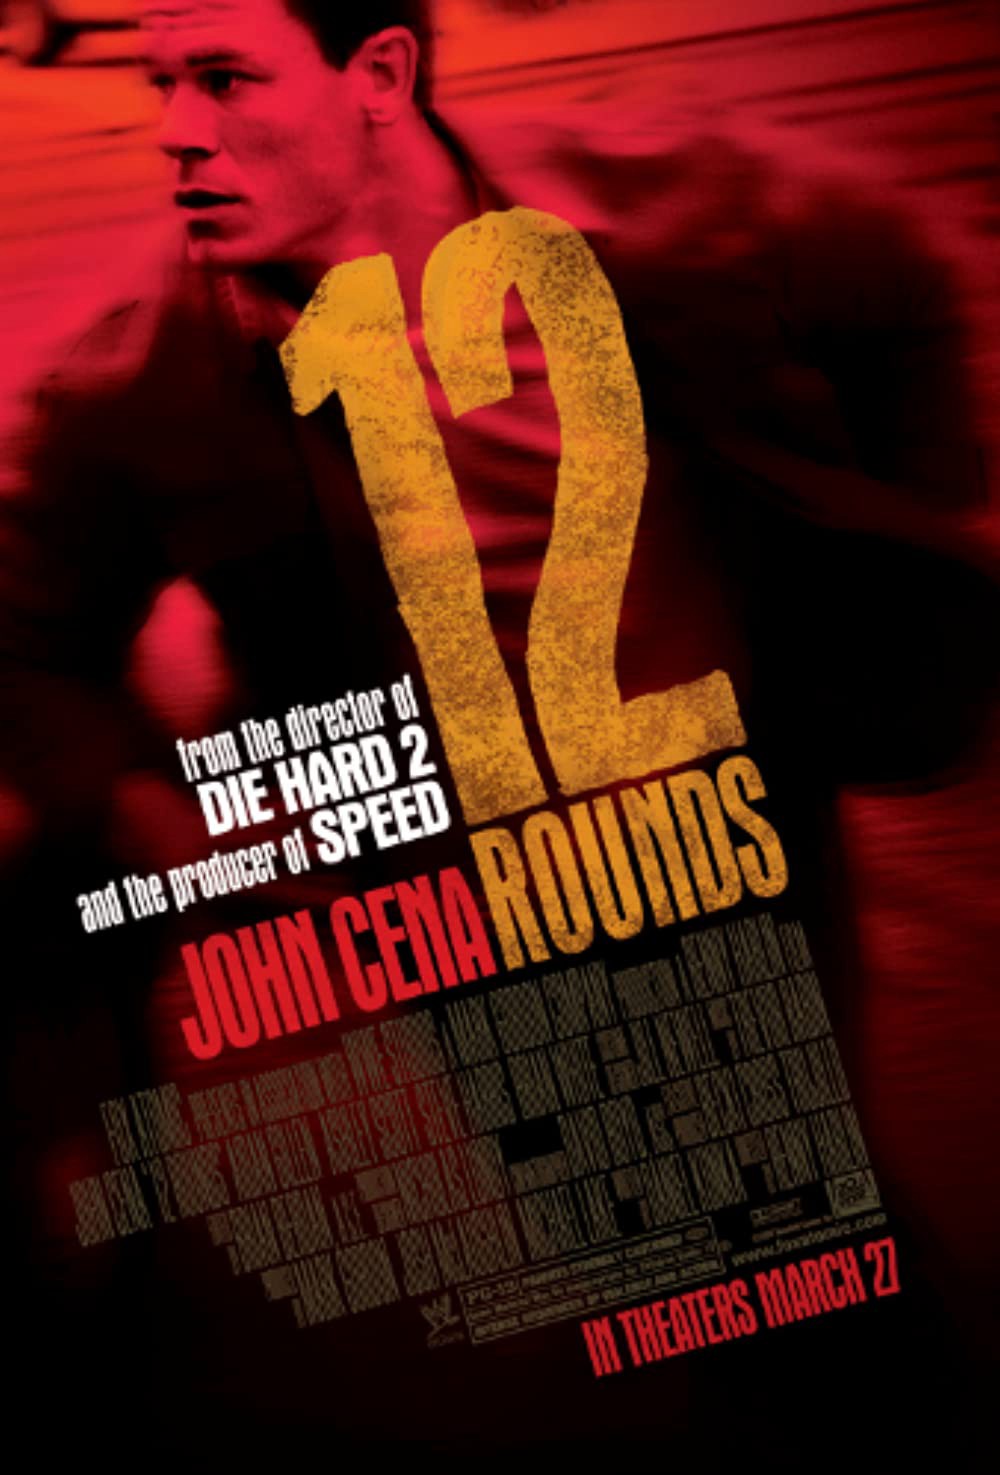 12 Hiệp Sinh Tử - 12 Rounds (2009)